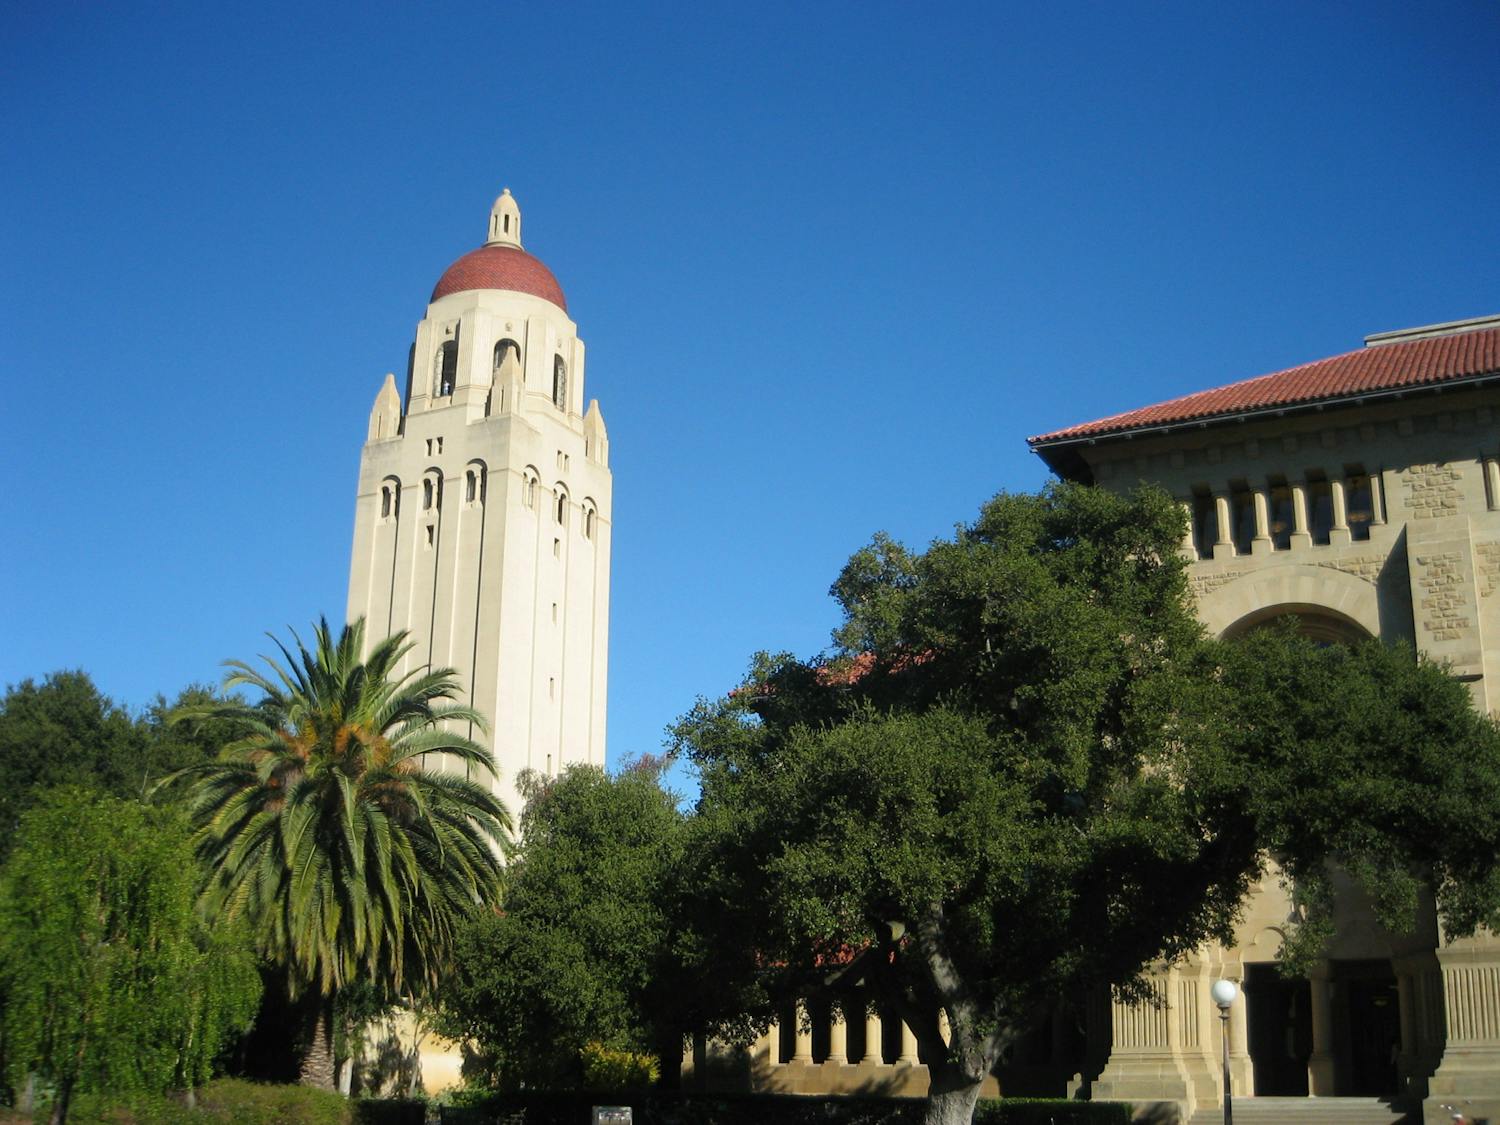 On Sept. 8, a letter was created by faculty at Stanford University in hopes of stopping the China Initiative permanently (Flickr).